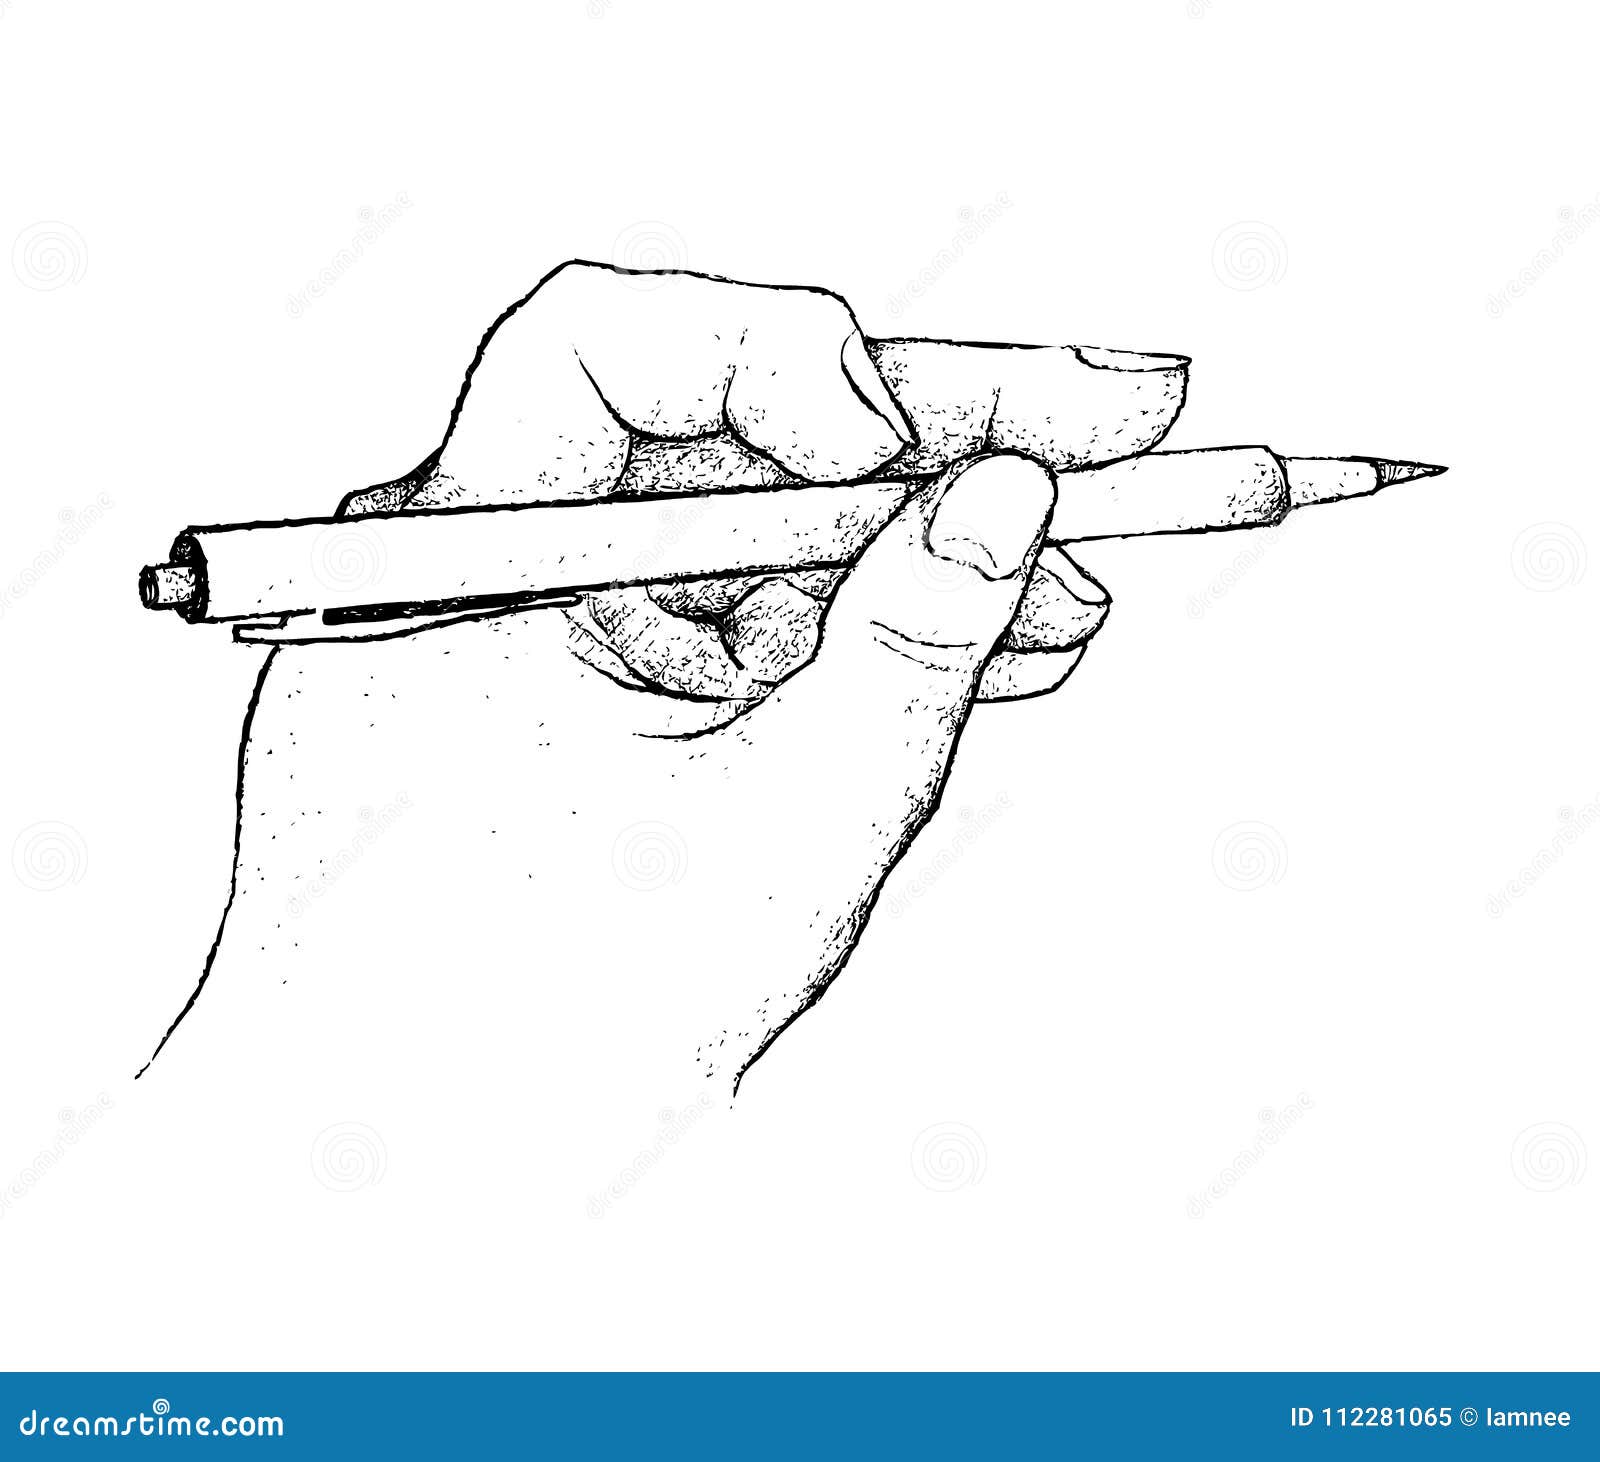 Hand Holding Pen Draw Stock Illustrations 1 054 Hand Holding Pen Draw Stock Illustrations Vectors Clipart Dreamstime